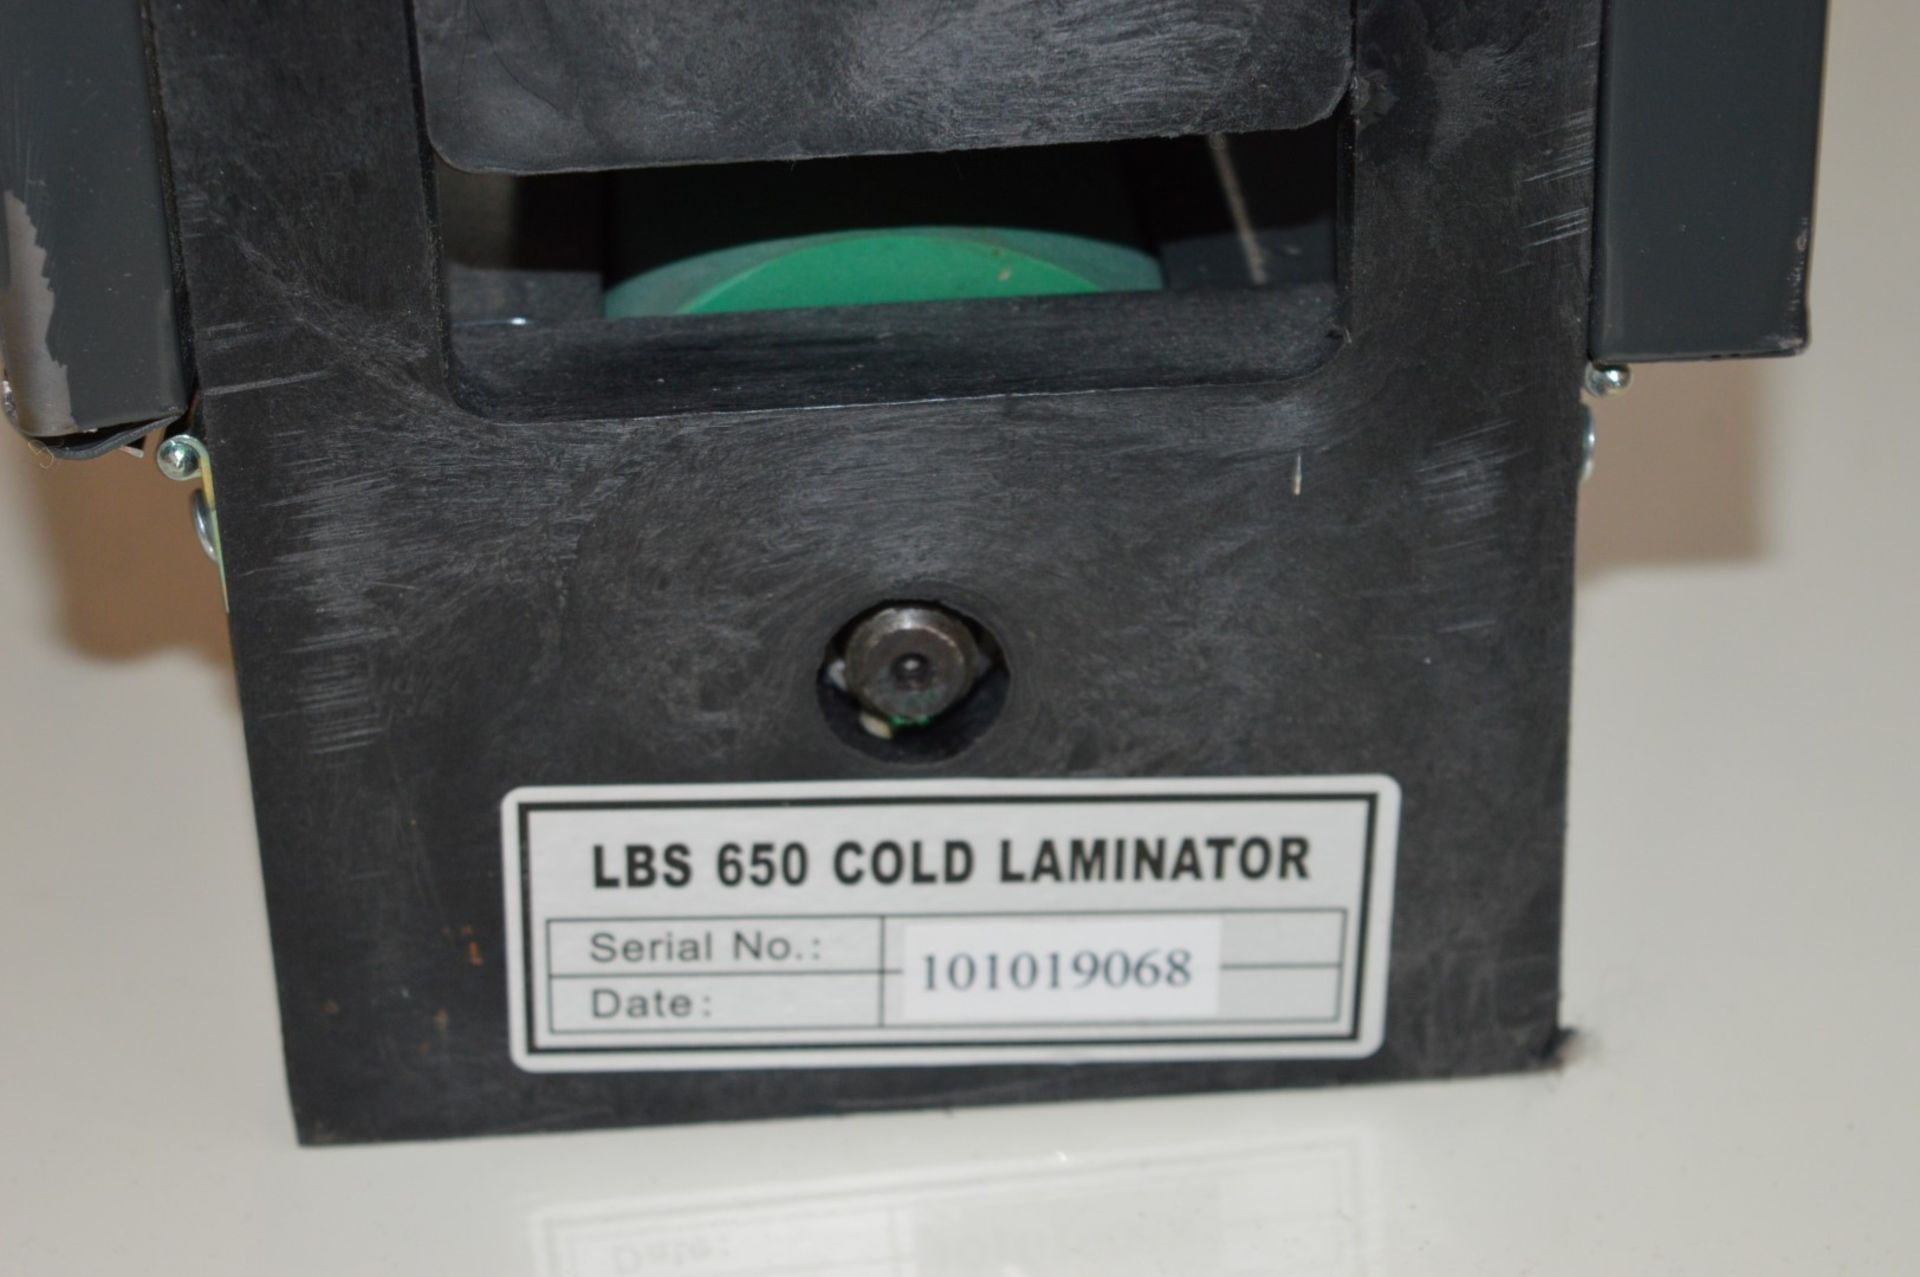 1 x Non Electric Graphics Laminator - LBS650 Cold Laminator - Ideal For Home or Office Use - 650mm - Image 5 of 5